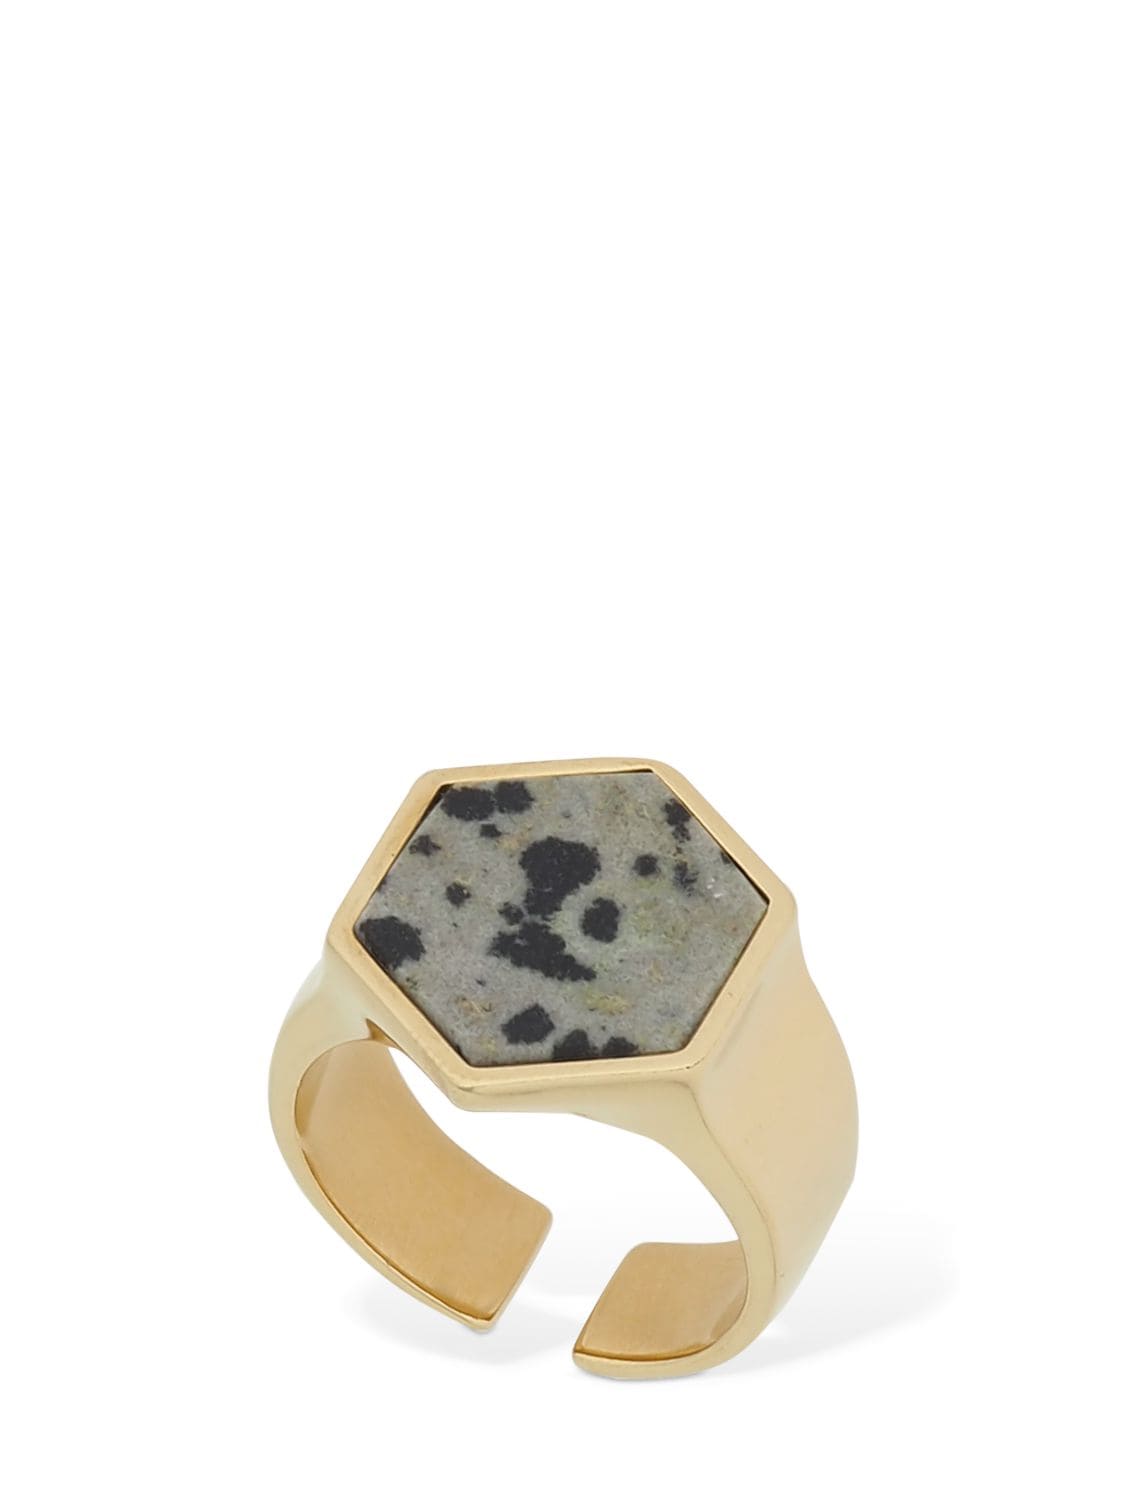 Isabel Marant Golden Mother Hexagonal Ring W/ Stone In Mastic,gold